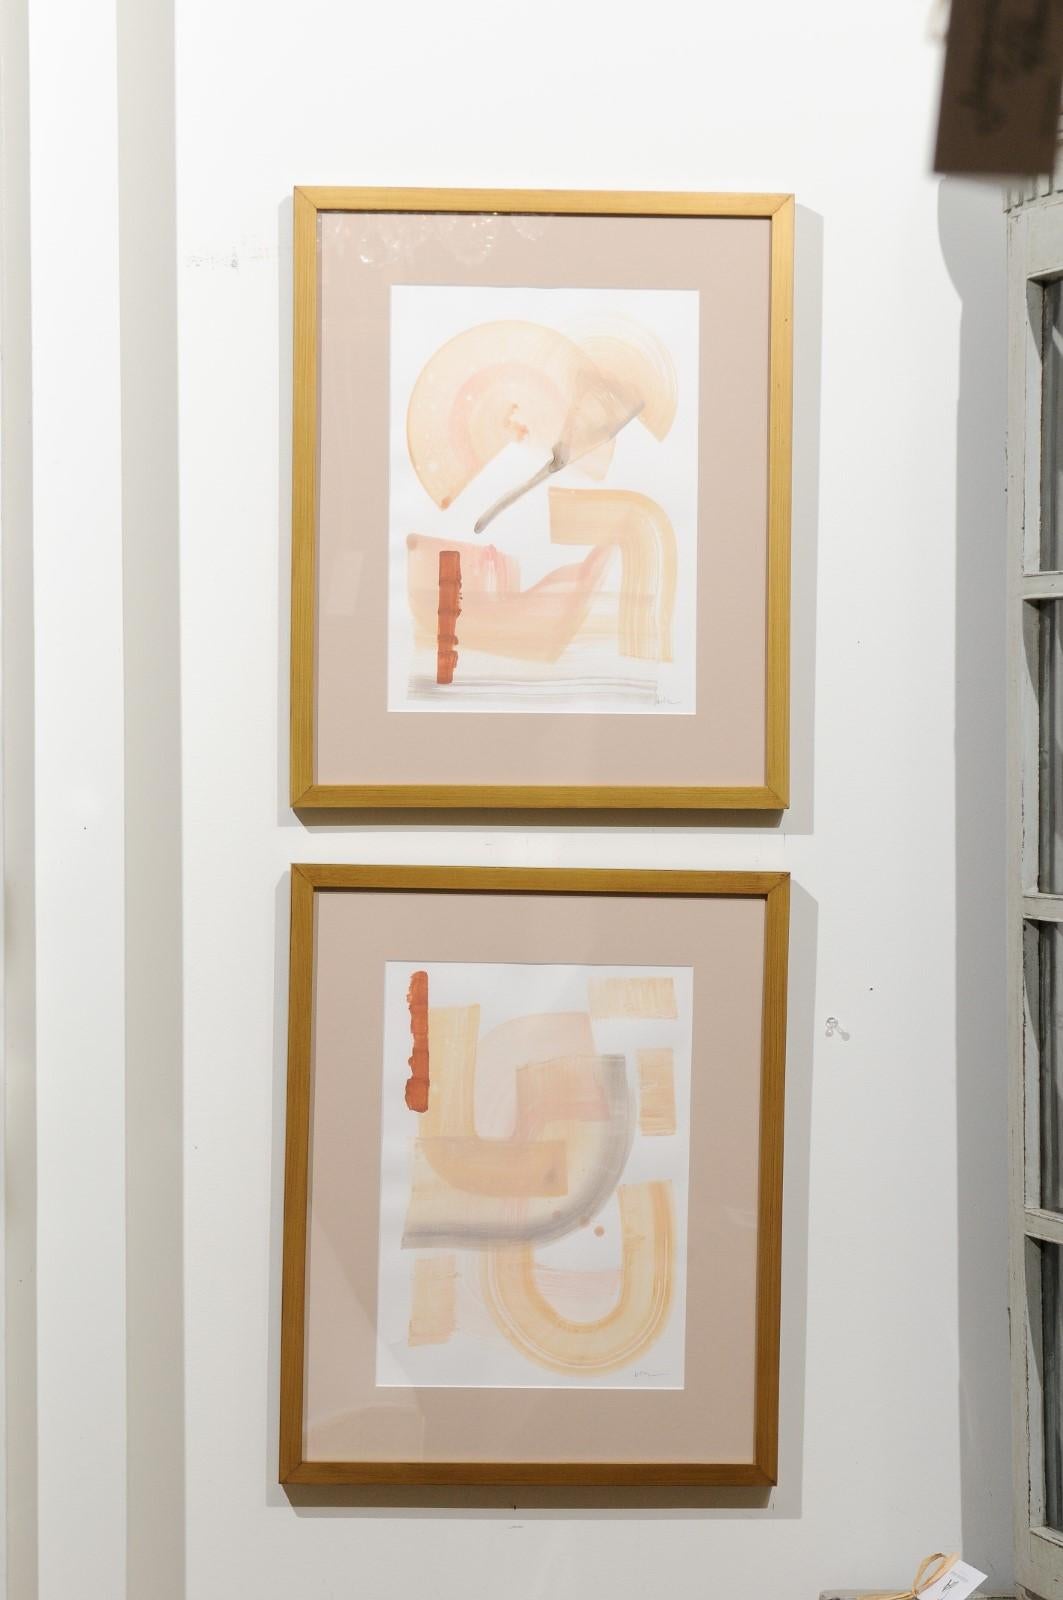 'Calm Heart 1 and 2', pair of original contemporary framed abstract paintings on cold pressed watercolor paper. Each of this pair of American abstract acrylic paintings features soft marks with muted colors and playful curvy shapes. Set inside